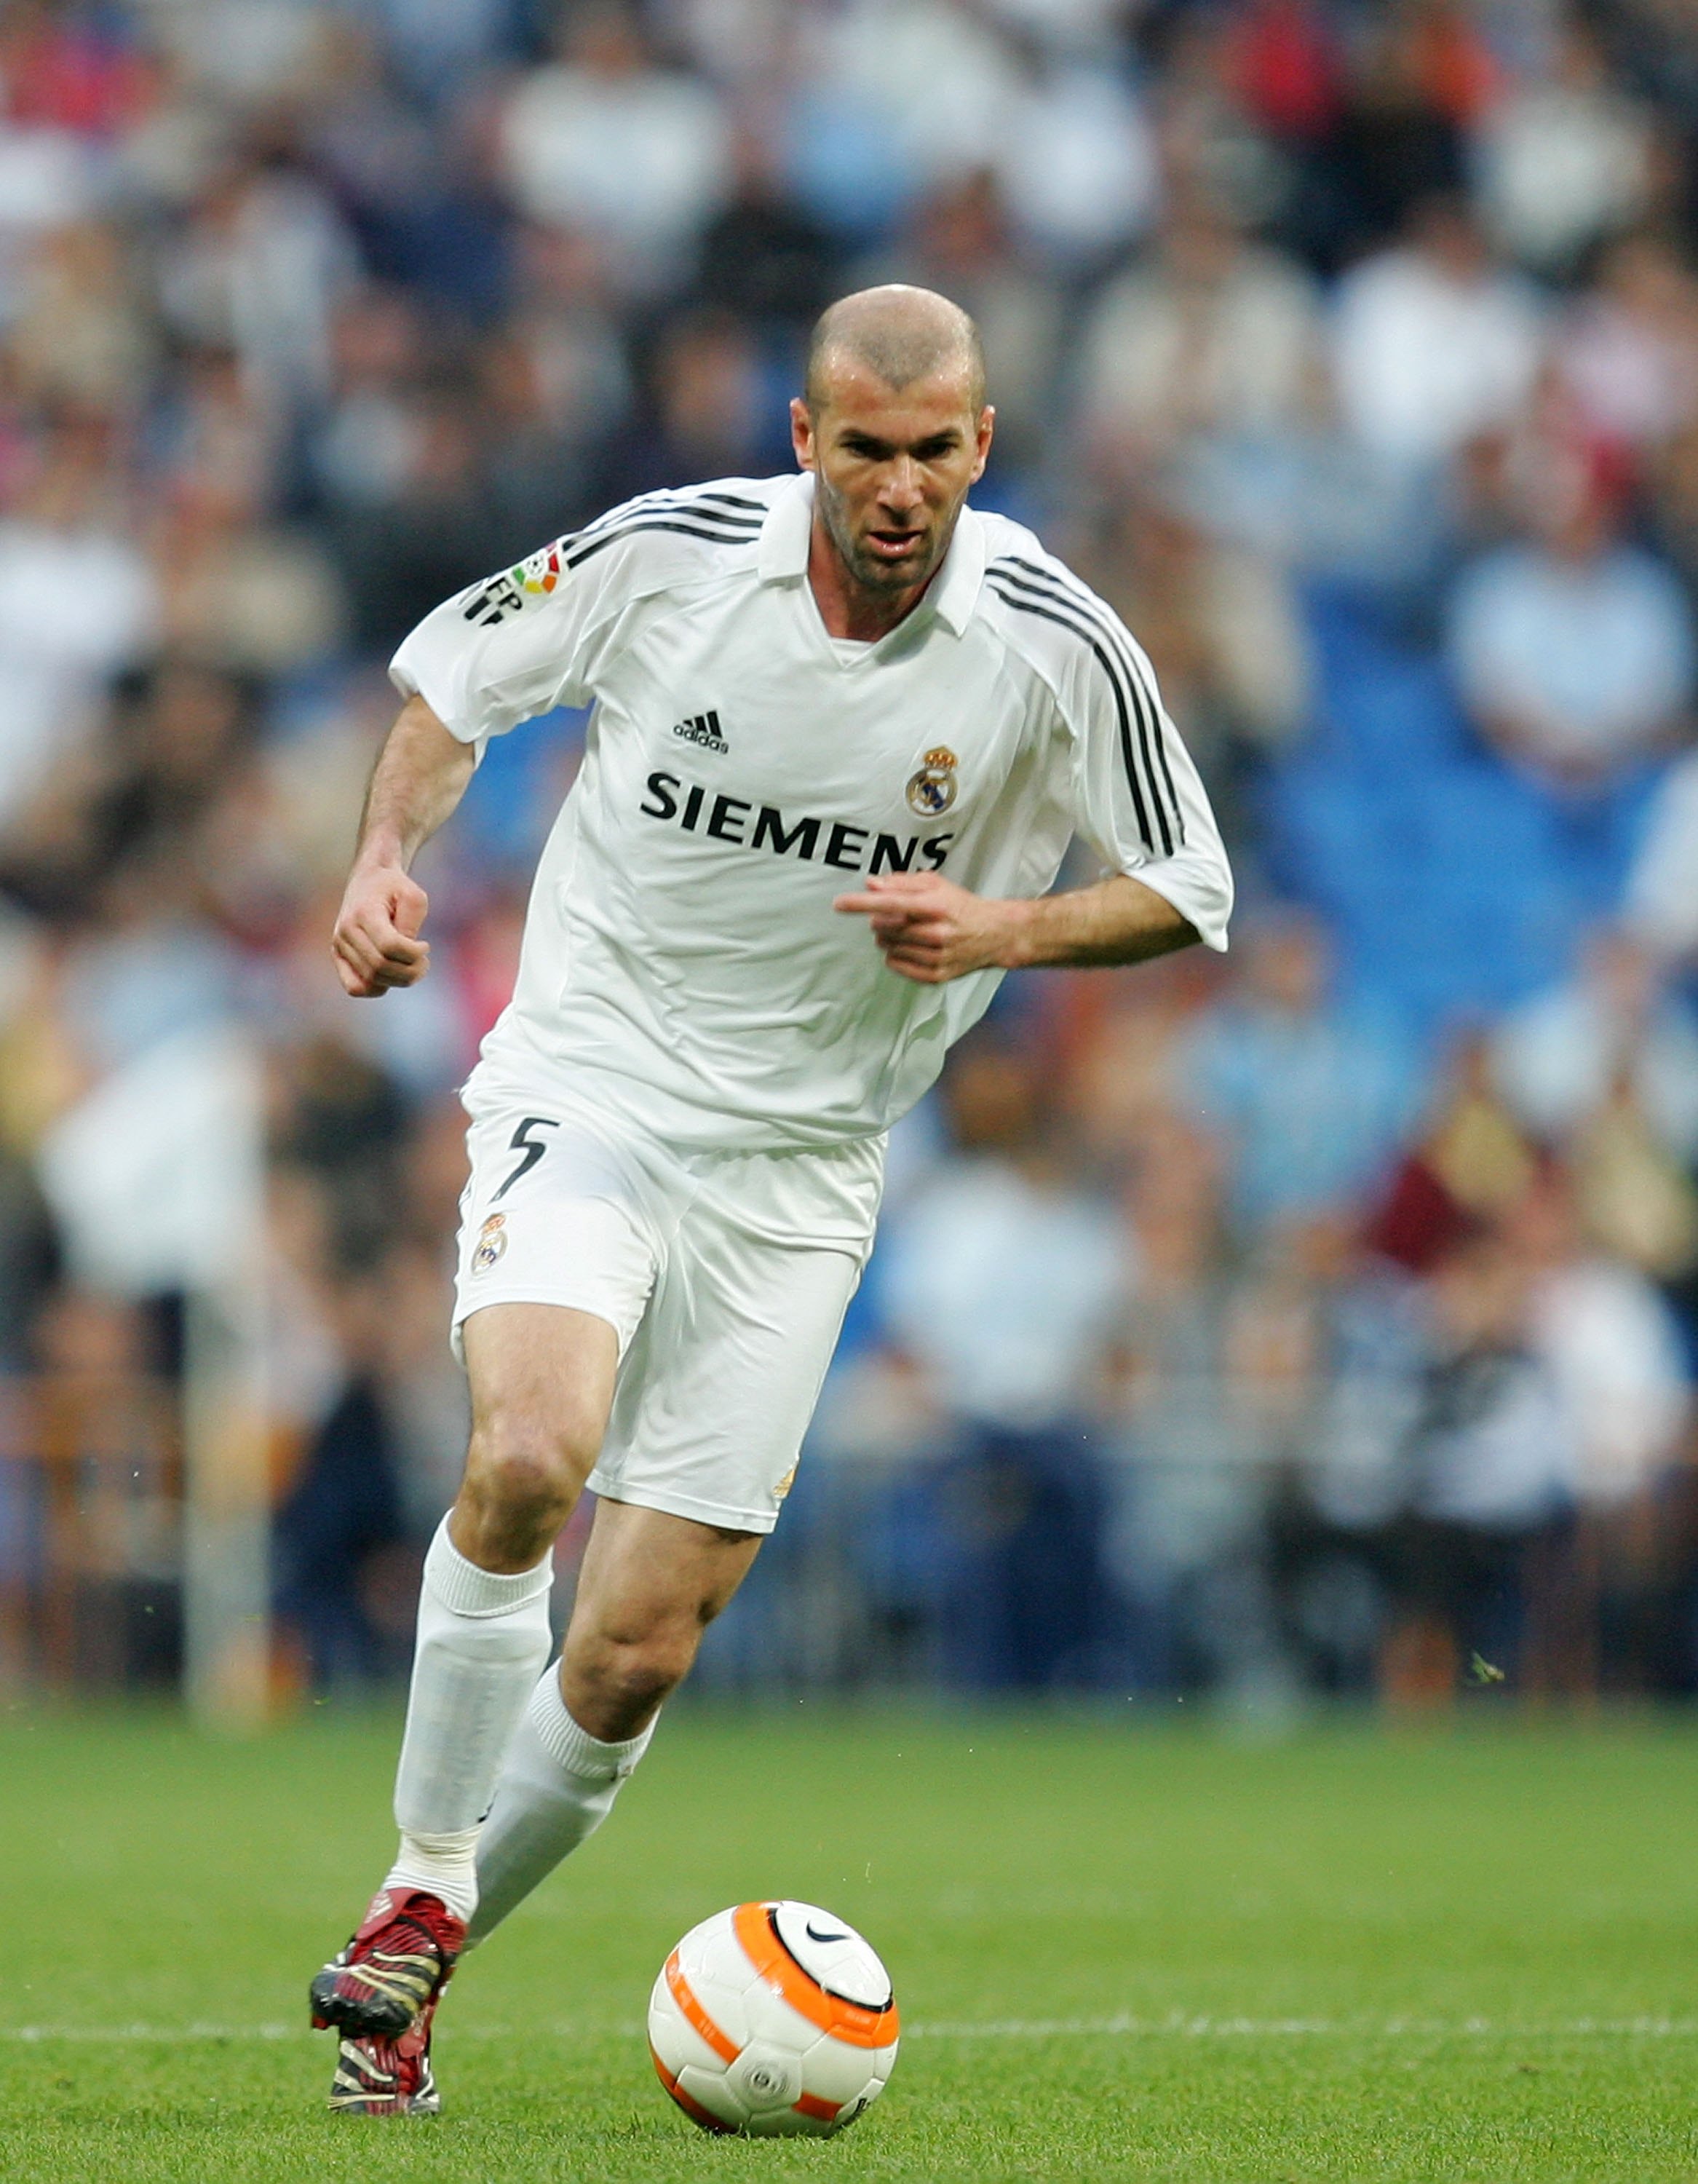 MADRID, SPAIN - APRIL 08:  Zinedine Zidane of Real Madrid dribblres with the ball during the Primera Liga match between Real Madrid and Real Sociedad at the Santiago Bernabeu stadium on April 8, 2006 in Madrid, Spain.  (Photo by Denis Doyle/Getty Images)